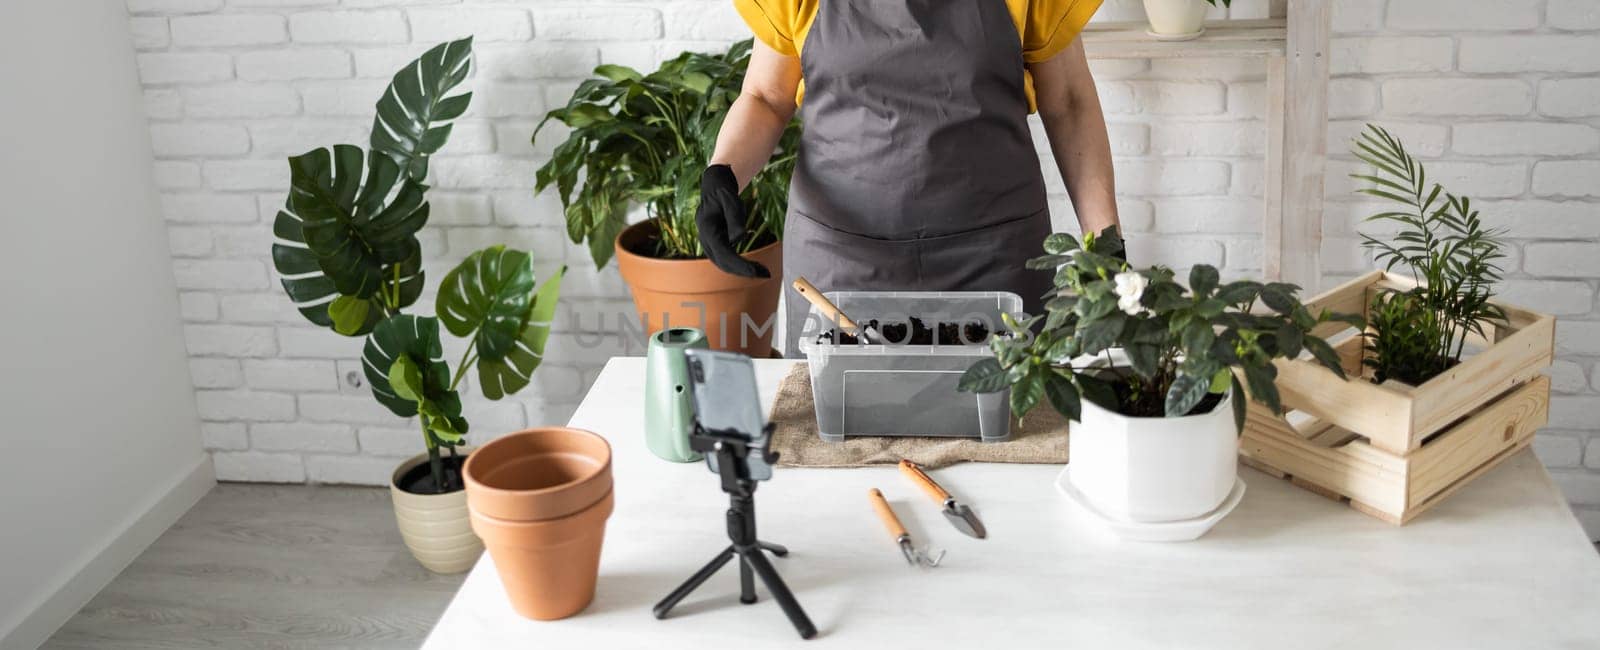 Relaxing home gardening. Smiling middle aged woman in black gloves with potted plant records gardening video blog in modern house - blogging and florist vlog influencer.